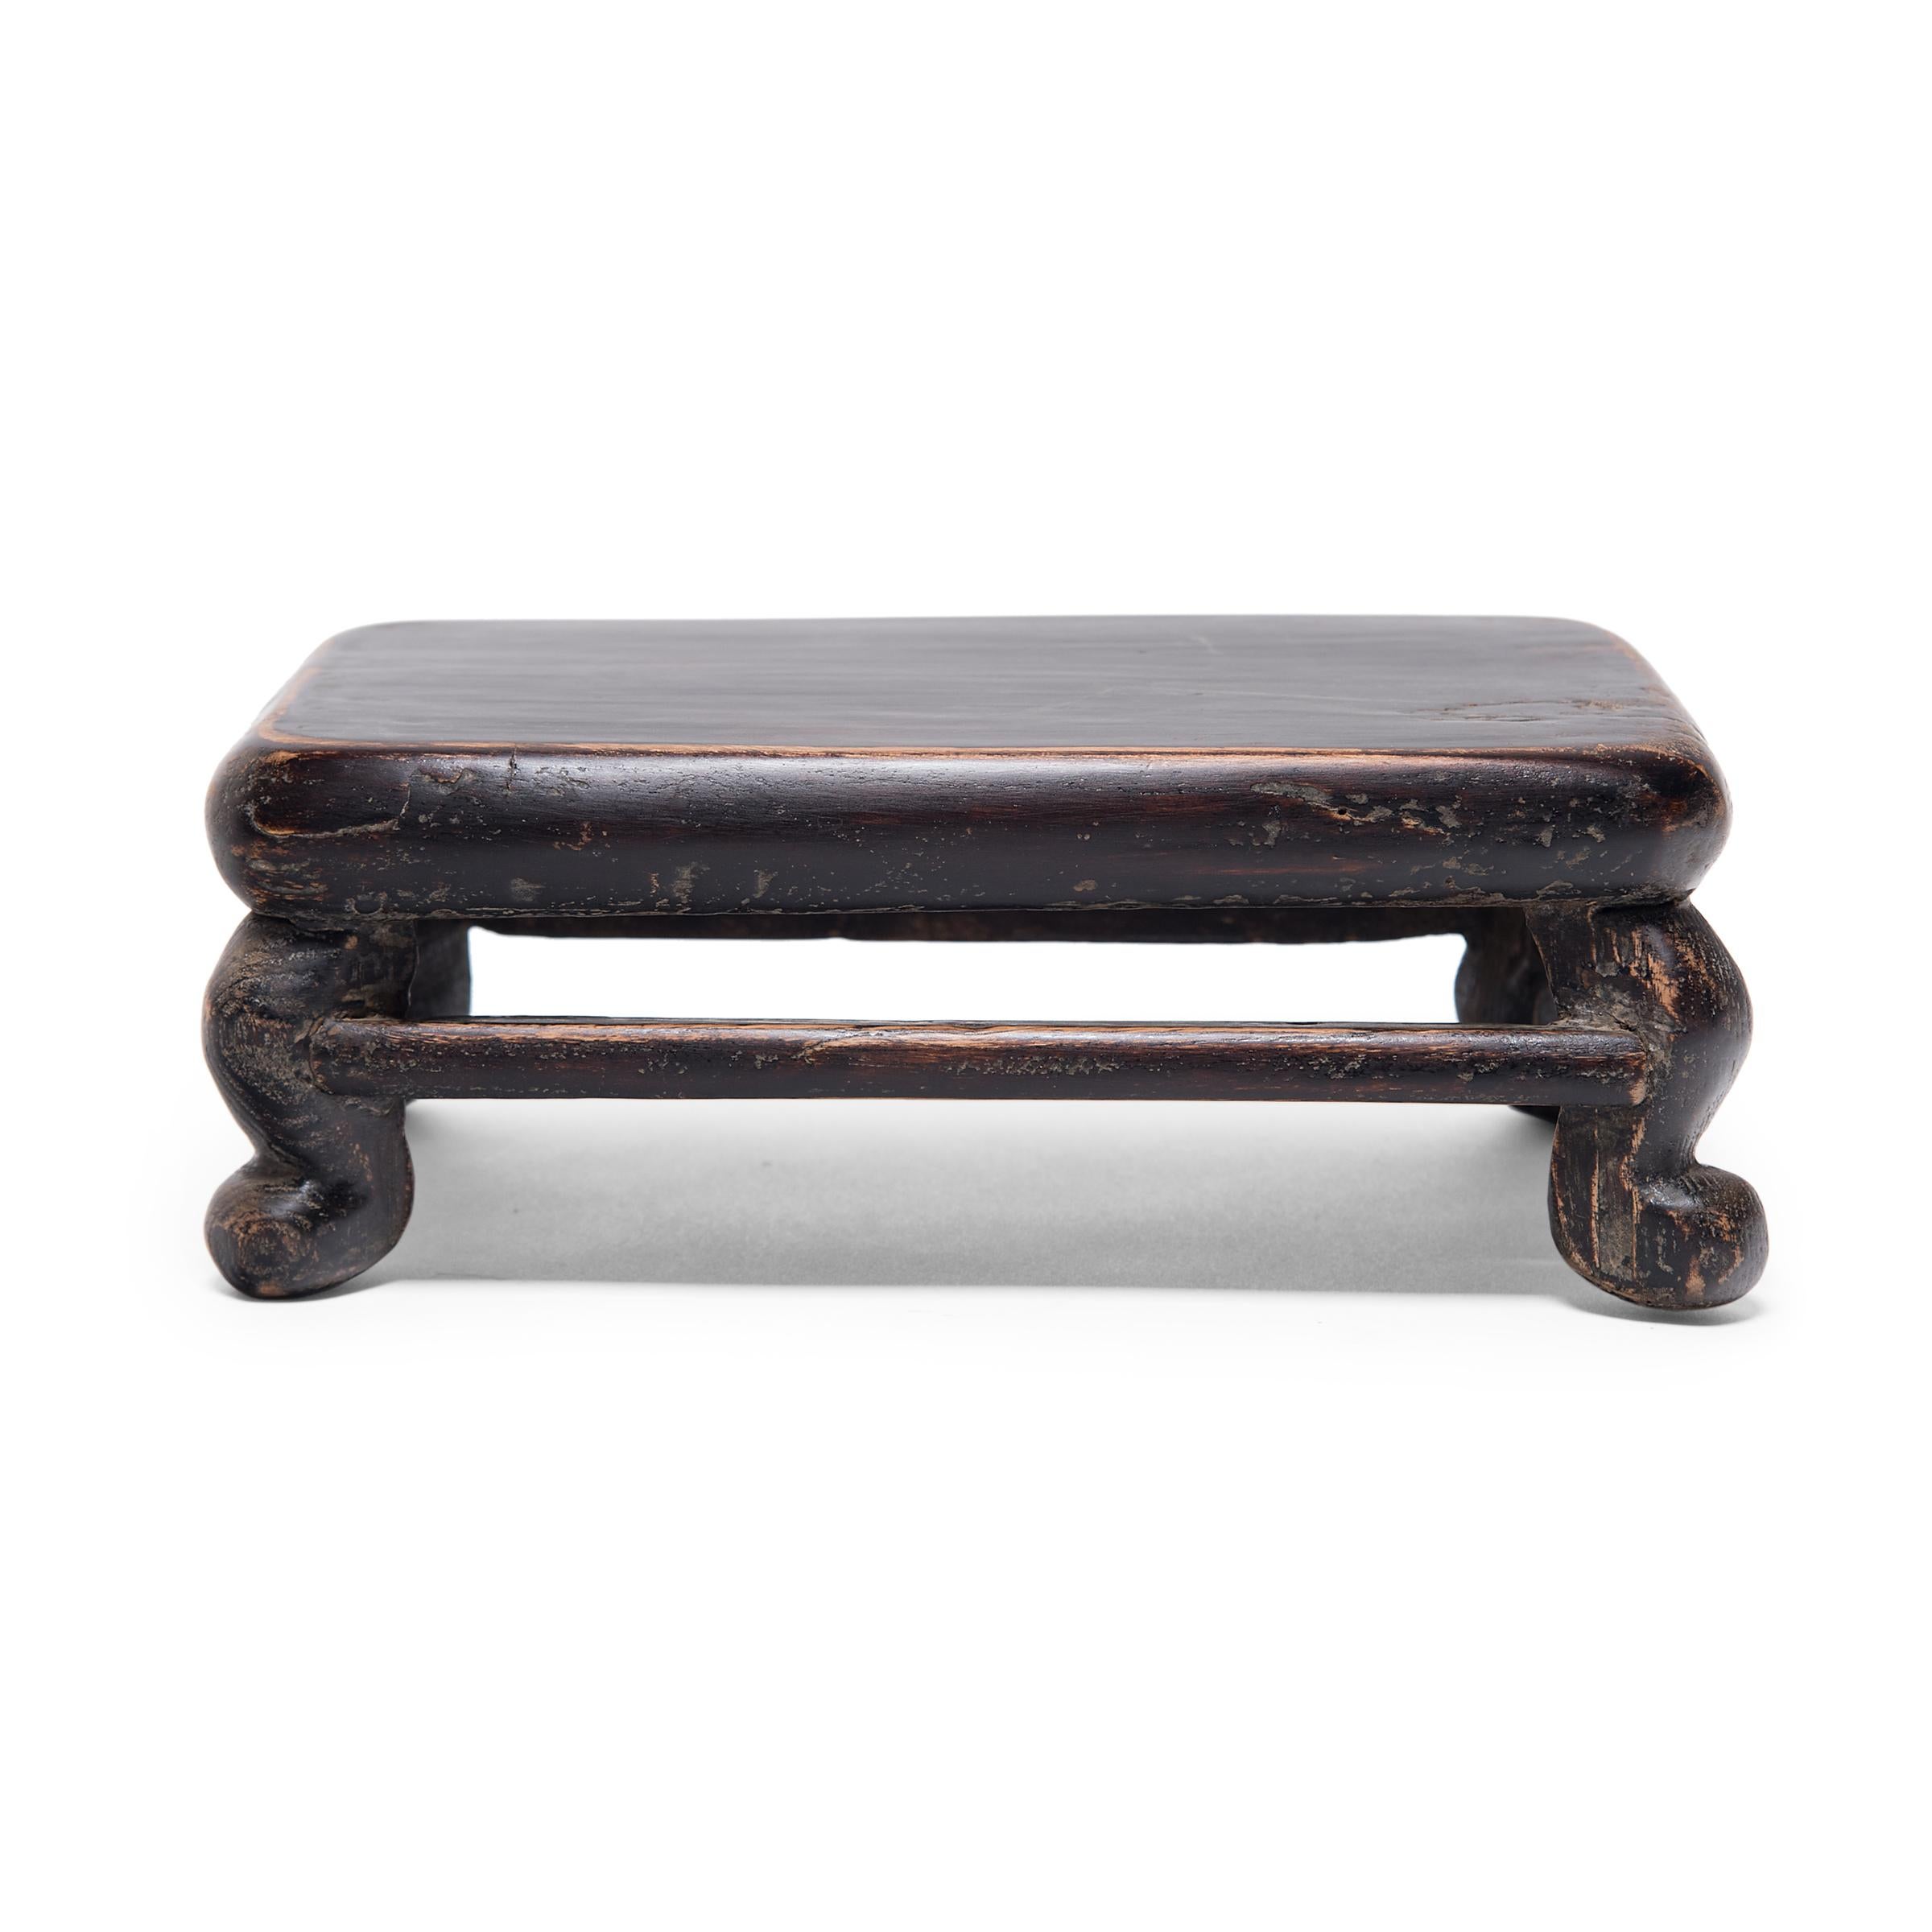 For thousands of years, precious Chinese artworks have been elevated for display on fine wooden table stands. Recognized today as works of art in their own right, these display stands are typically finely carved, crafted of exquisite hardwoods, or